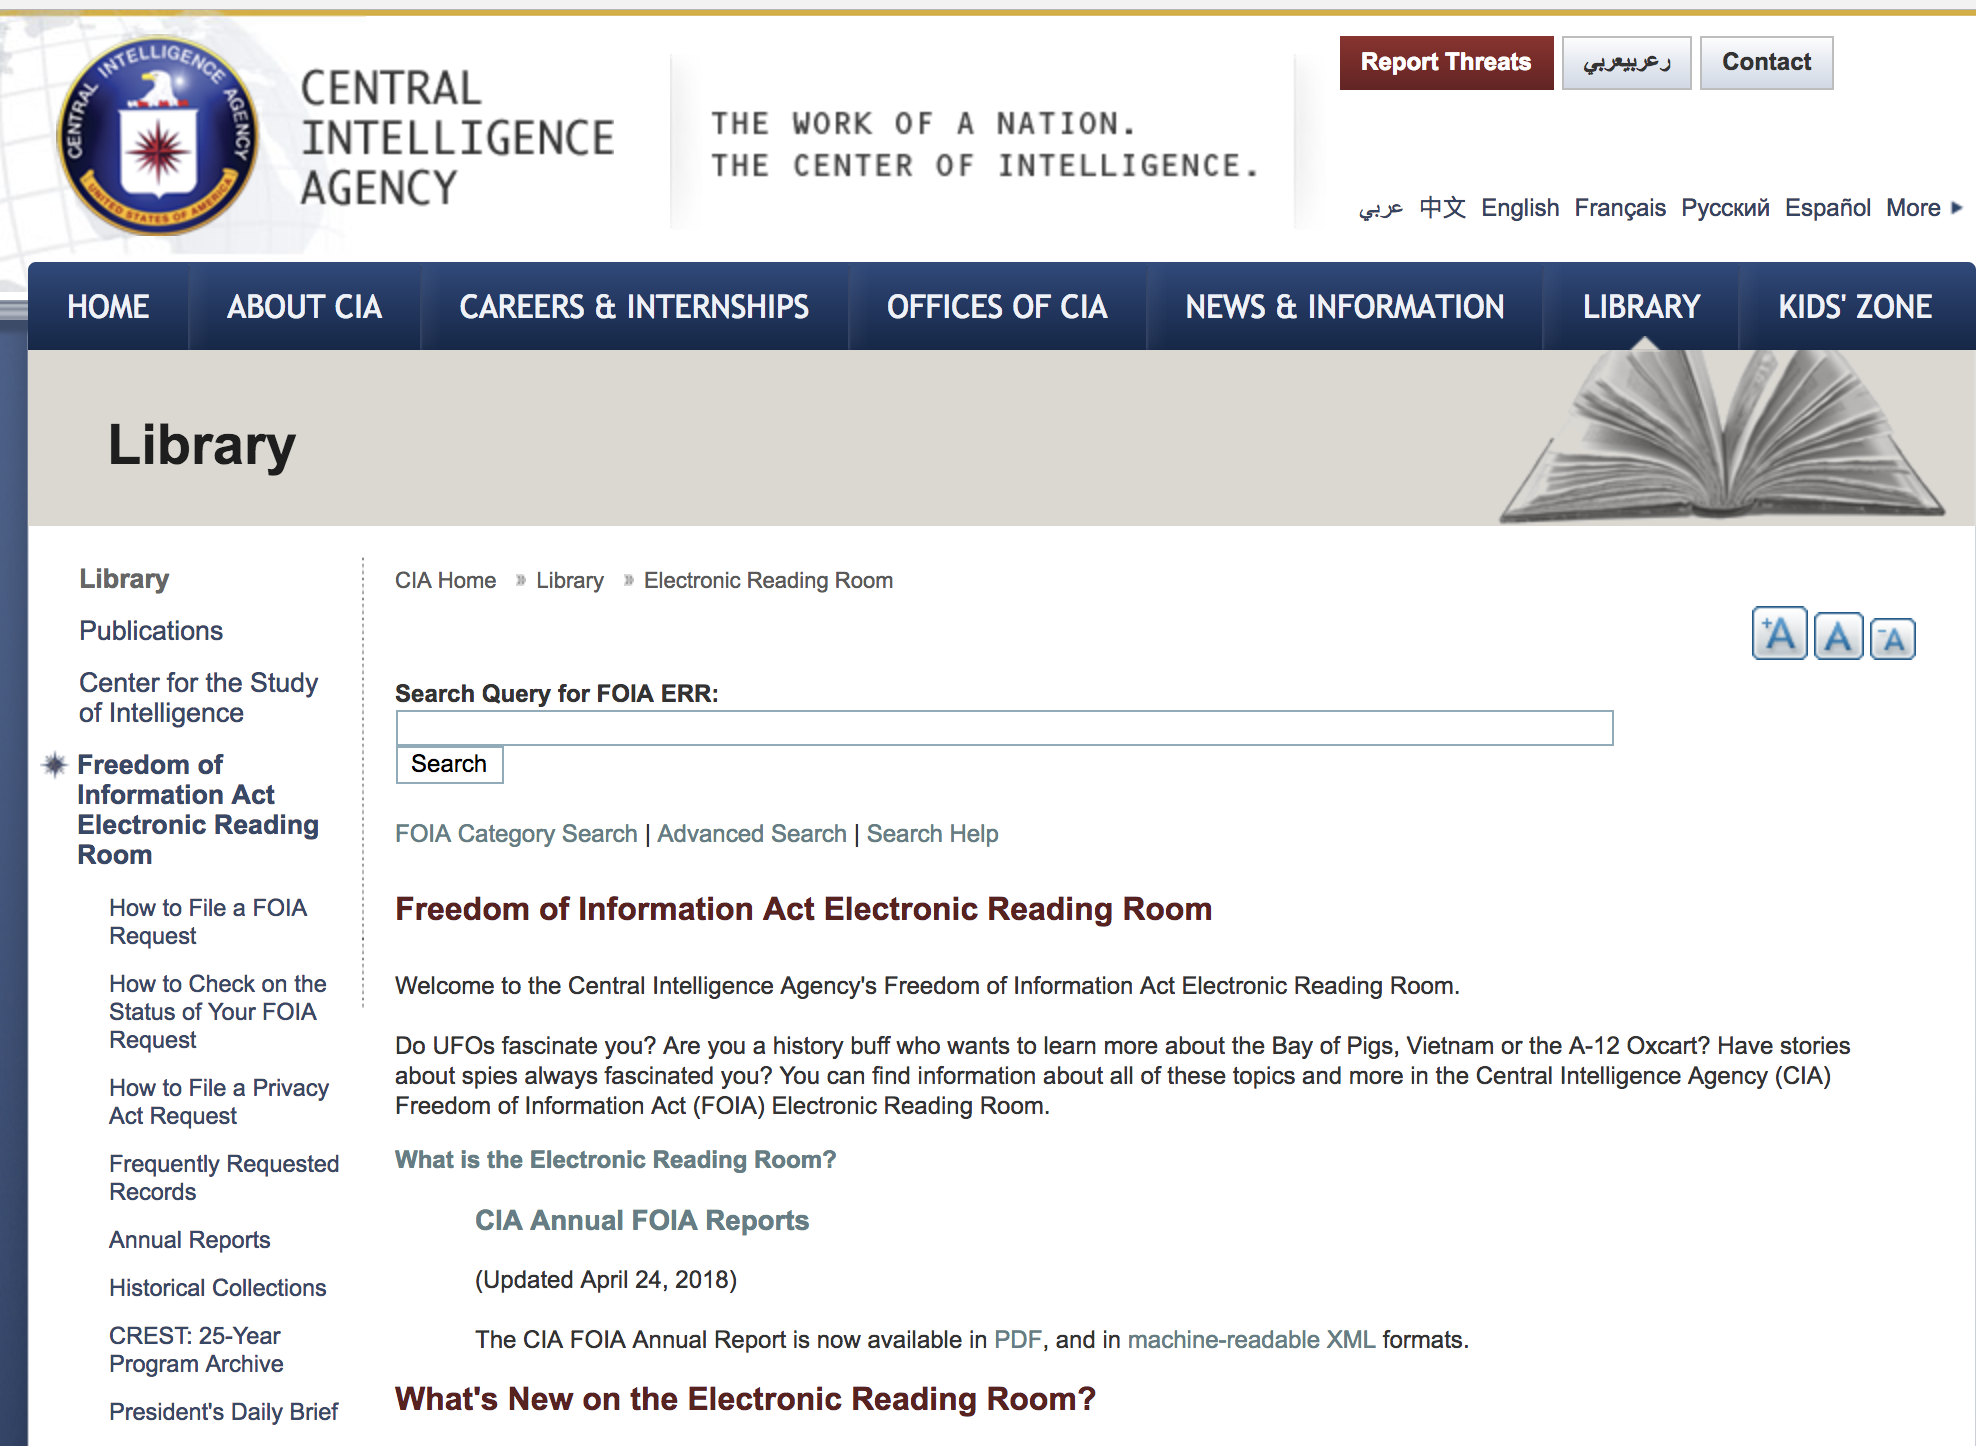 Design Critique The FOIA Electronic Reading Room of the CIA [website